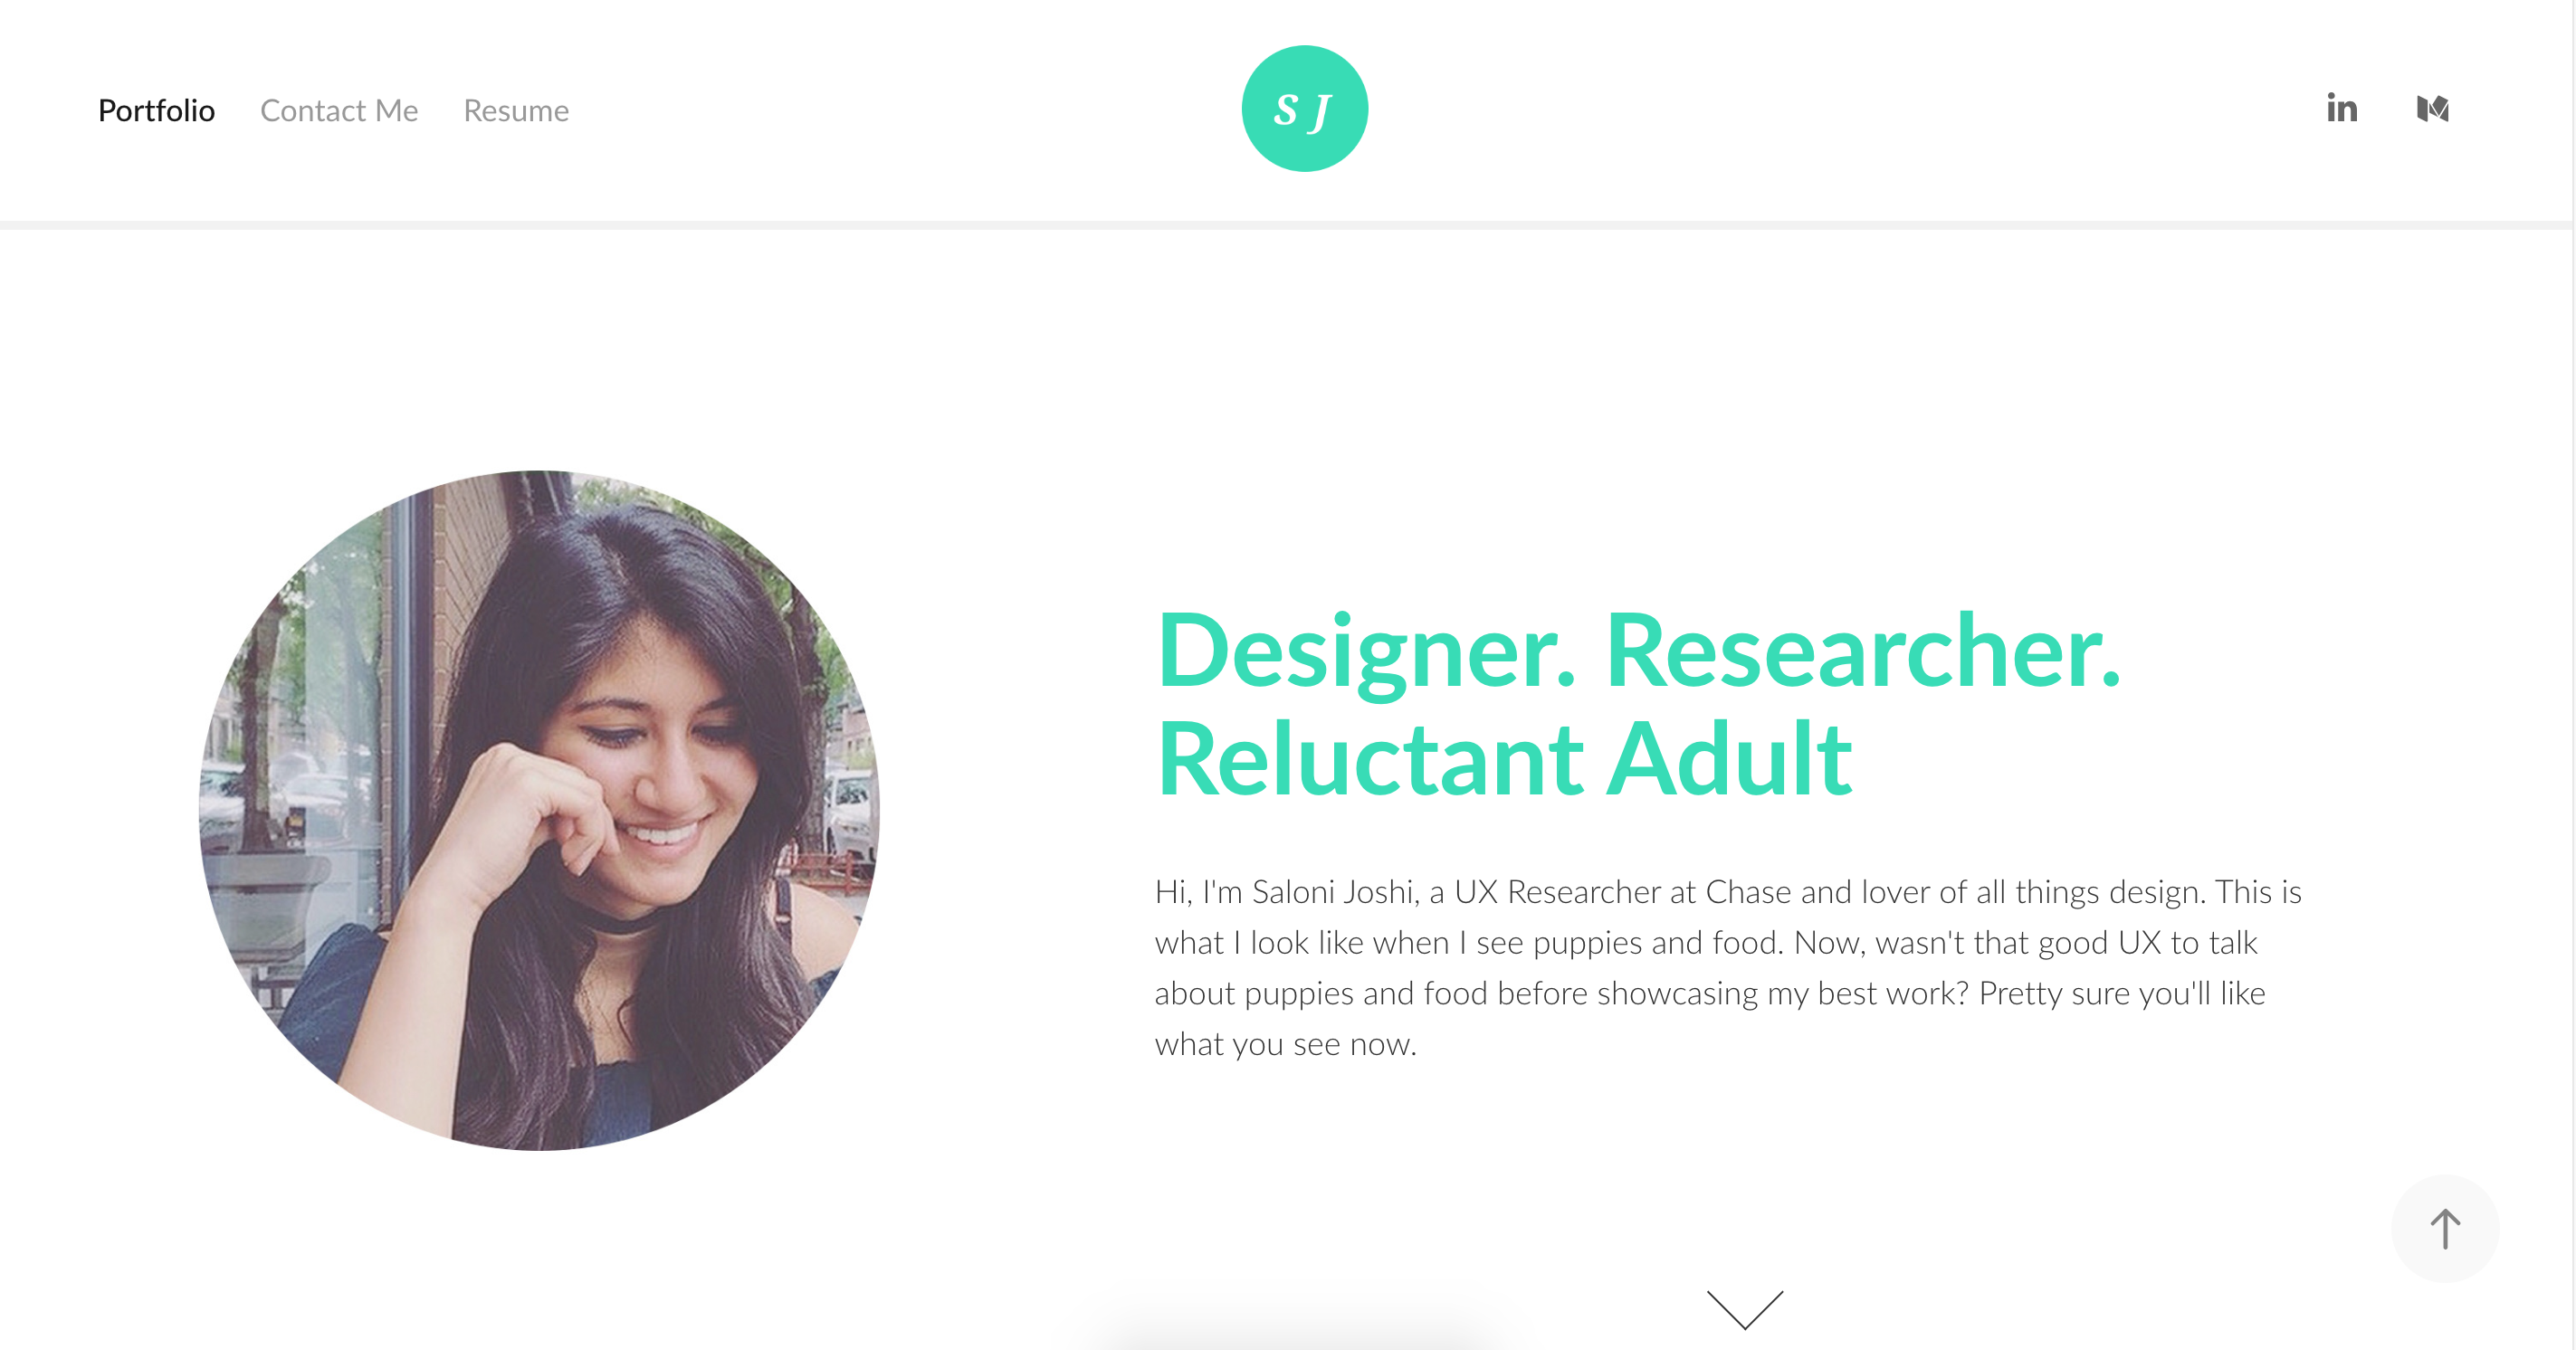 How to UX your portfolio to get more interviews  by Saloni Joshi